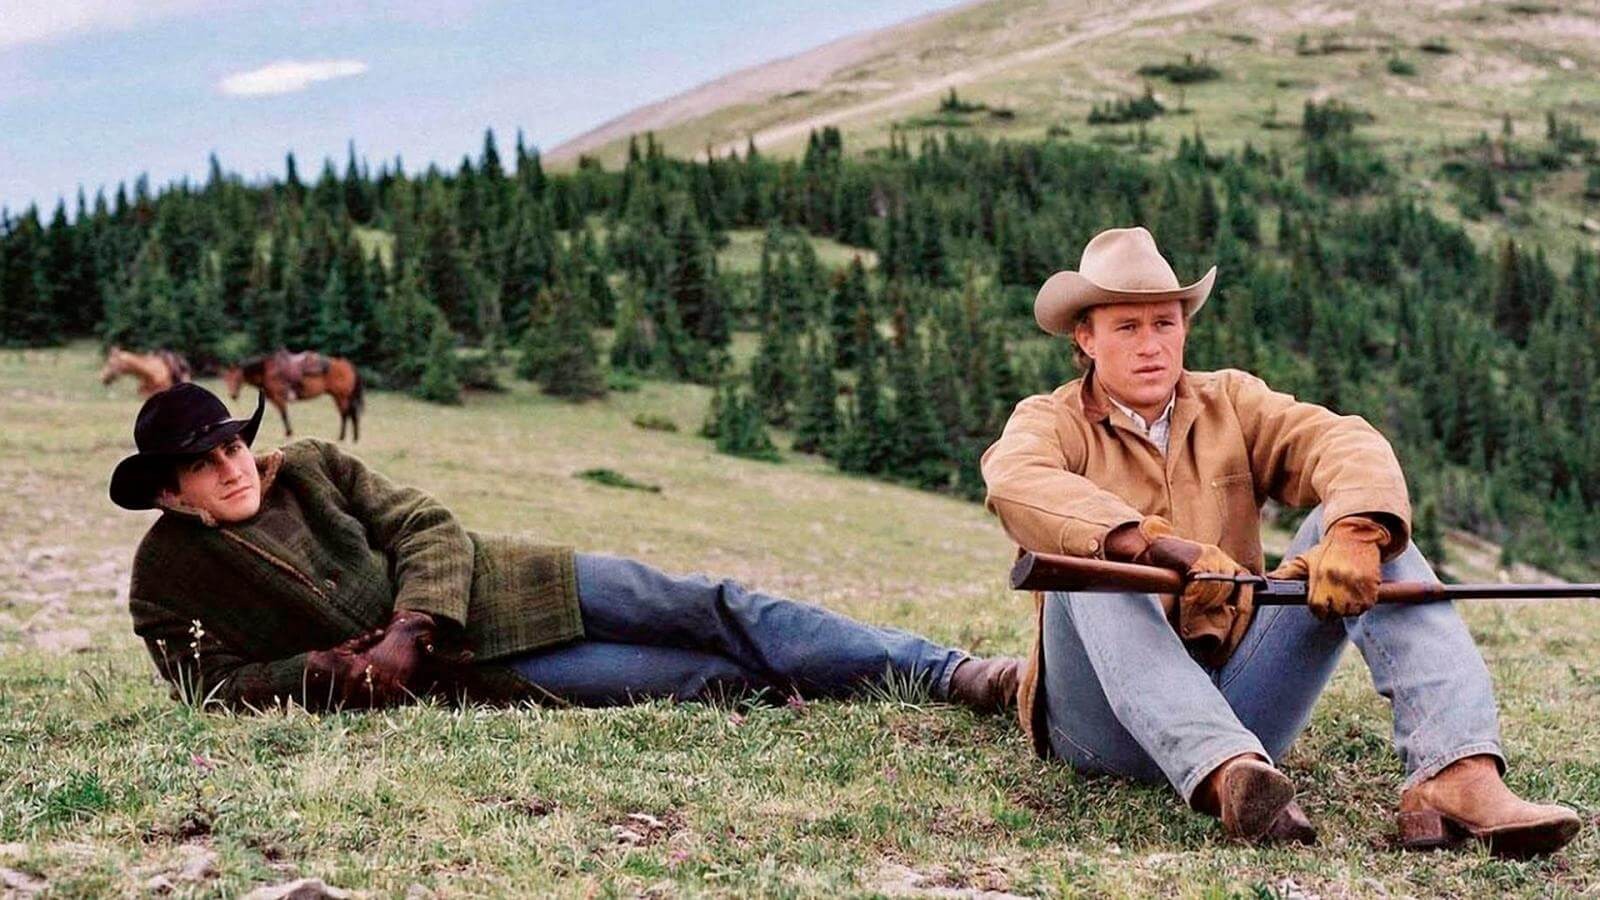 Heath Ledger with Jake Gyllenhaal in a still from Brokeback Mountain (2005)